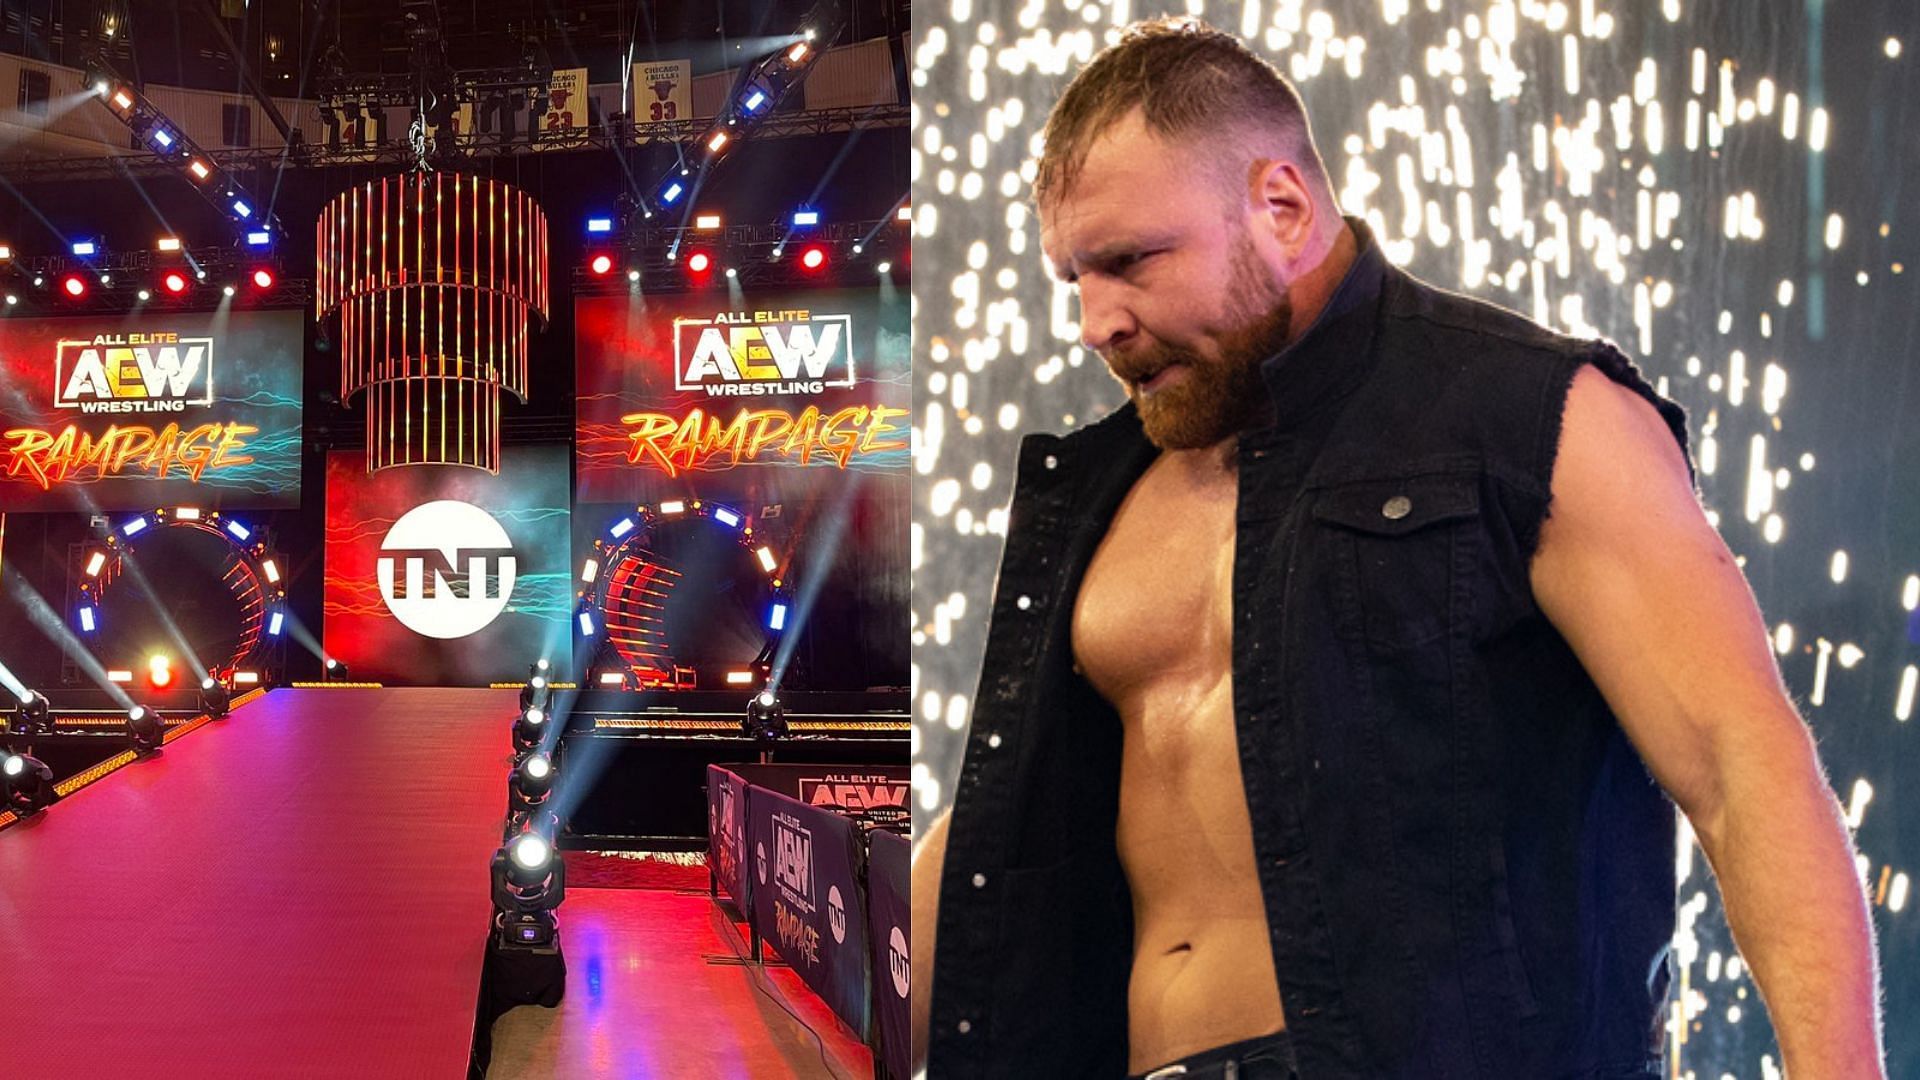 Rampage entrance ramp (left); Jon Moxley (right)